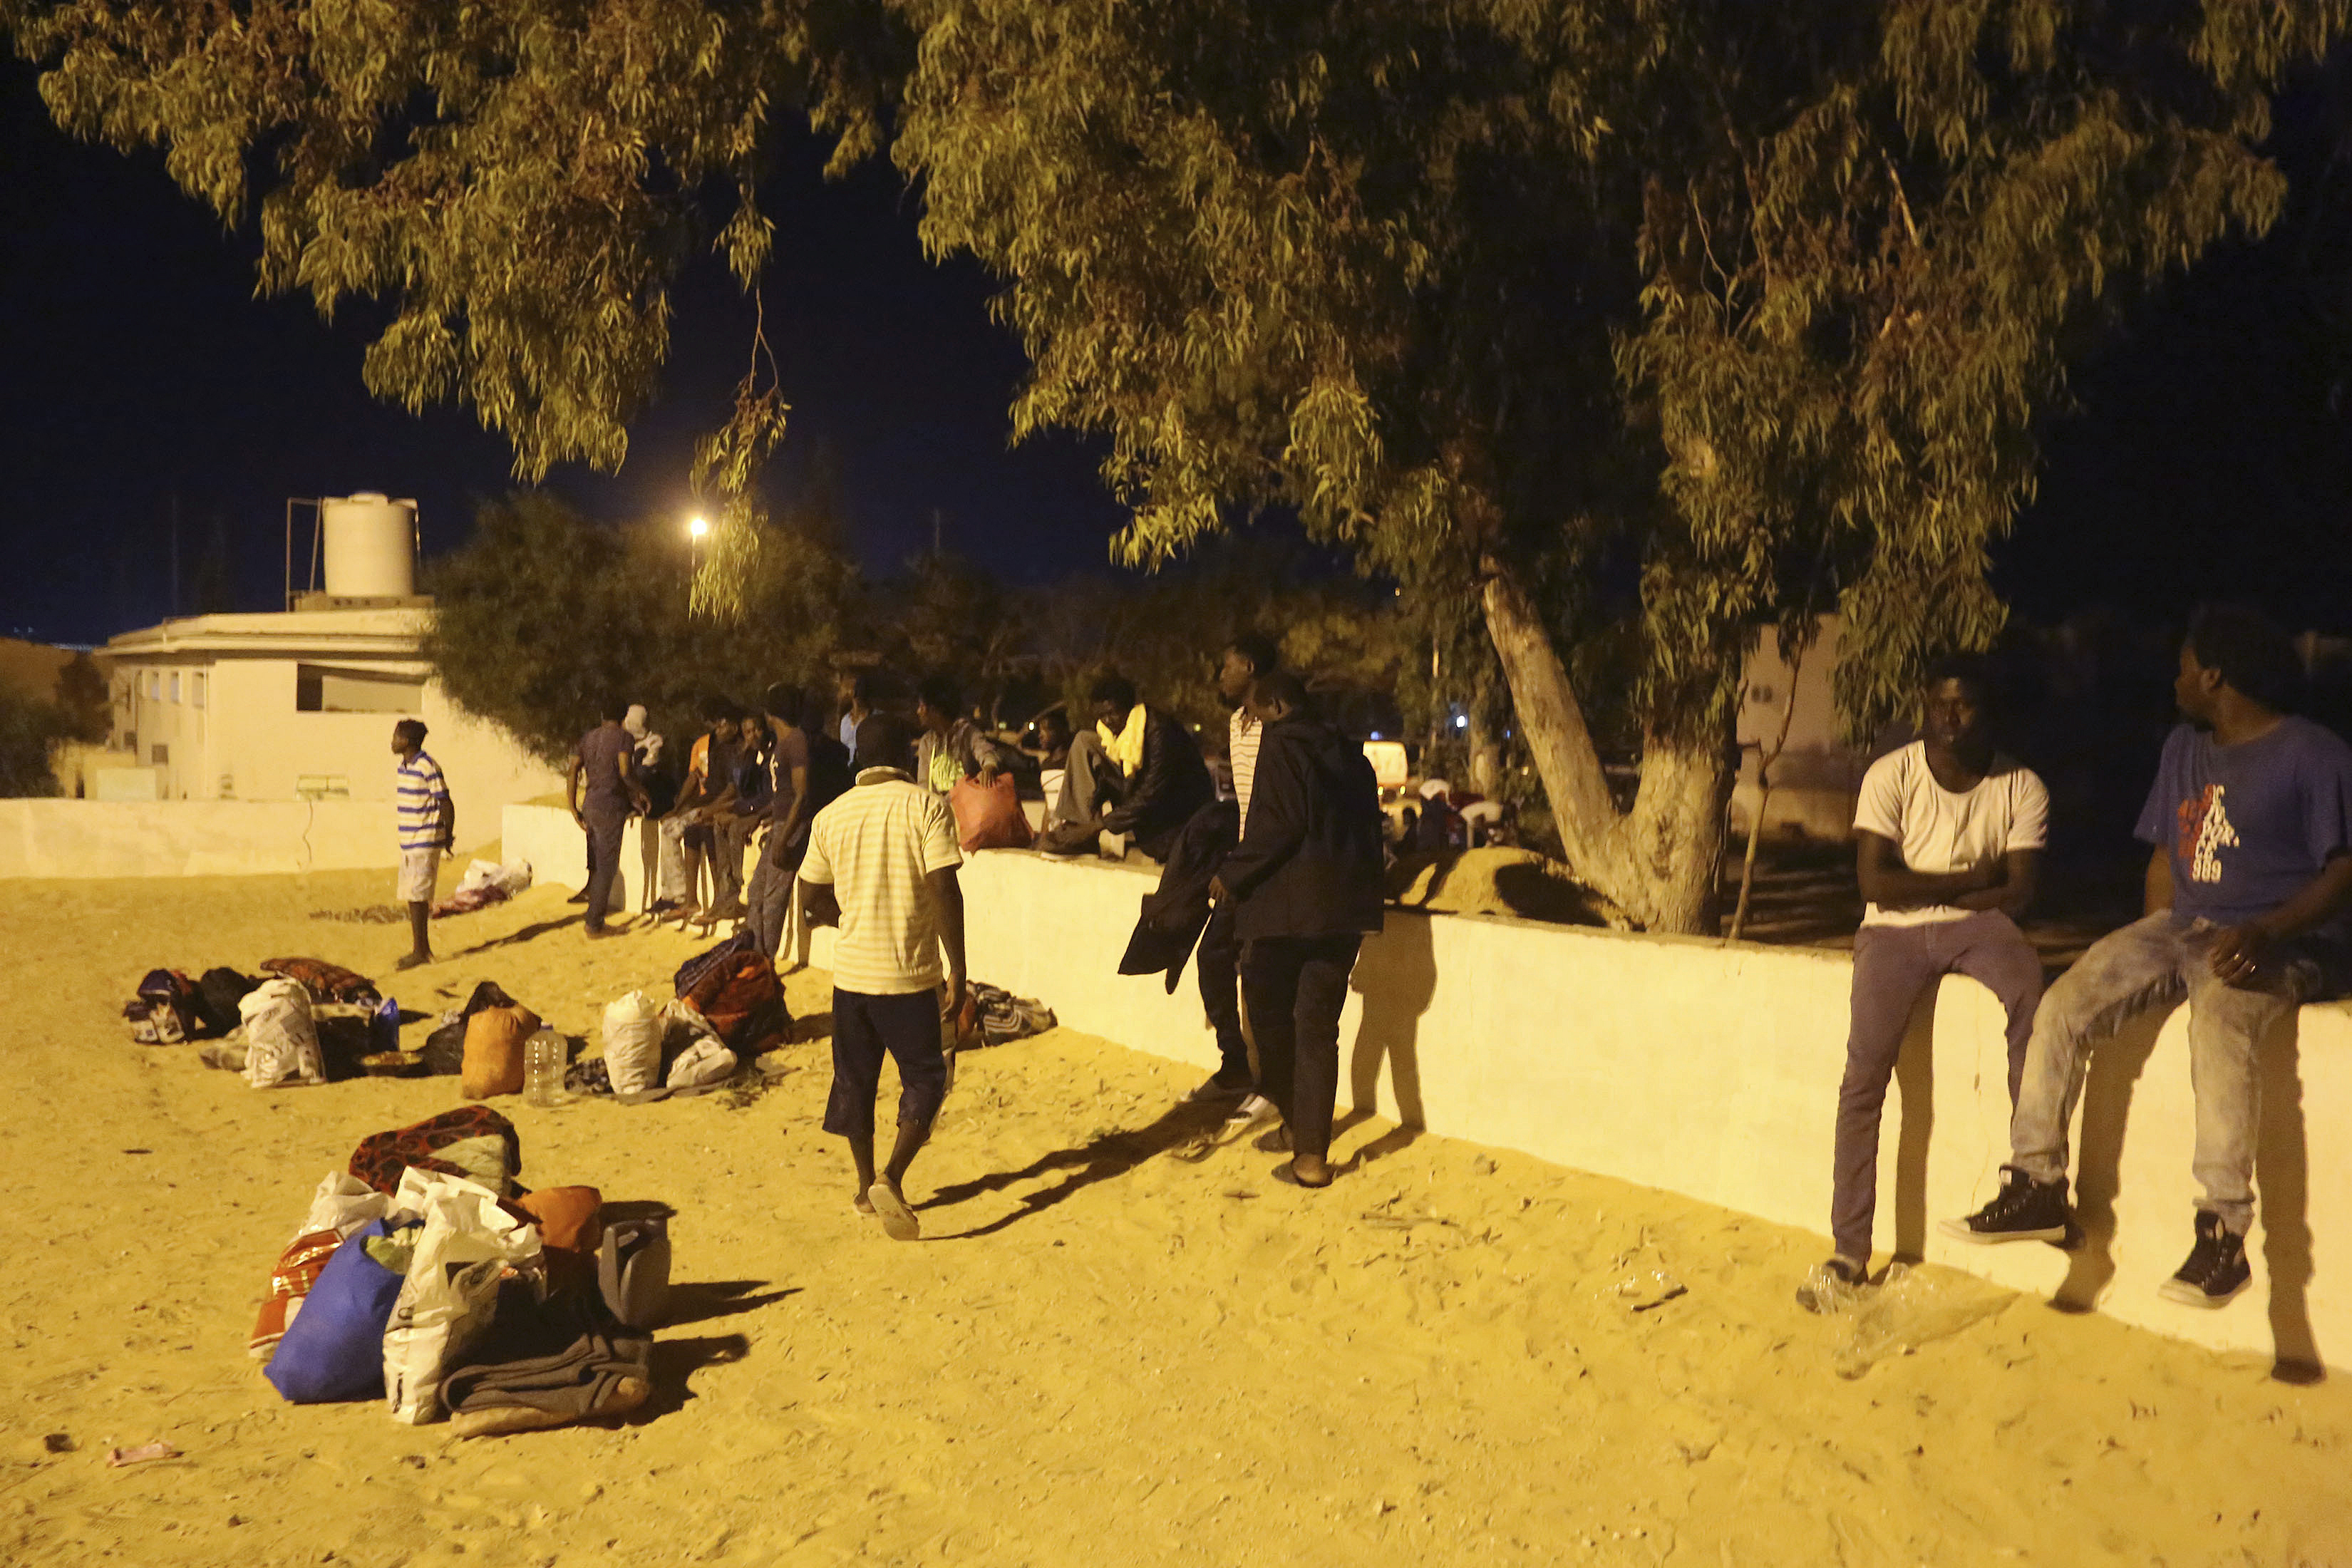 Migrants, who were not affected by an airstrike, take shelter in Tajoura, east of Tripoli Wednesday, July 3, 2019. An airstrike hit a detention center for migrants early Wednesday in the Libyan capital. (AP Photo/Hazem Ahmed)  (AP Photo/Hazem Ahmed)